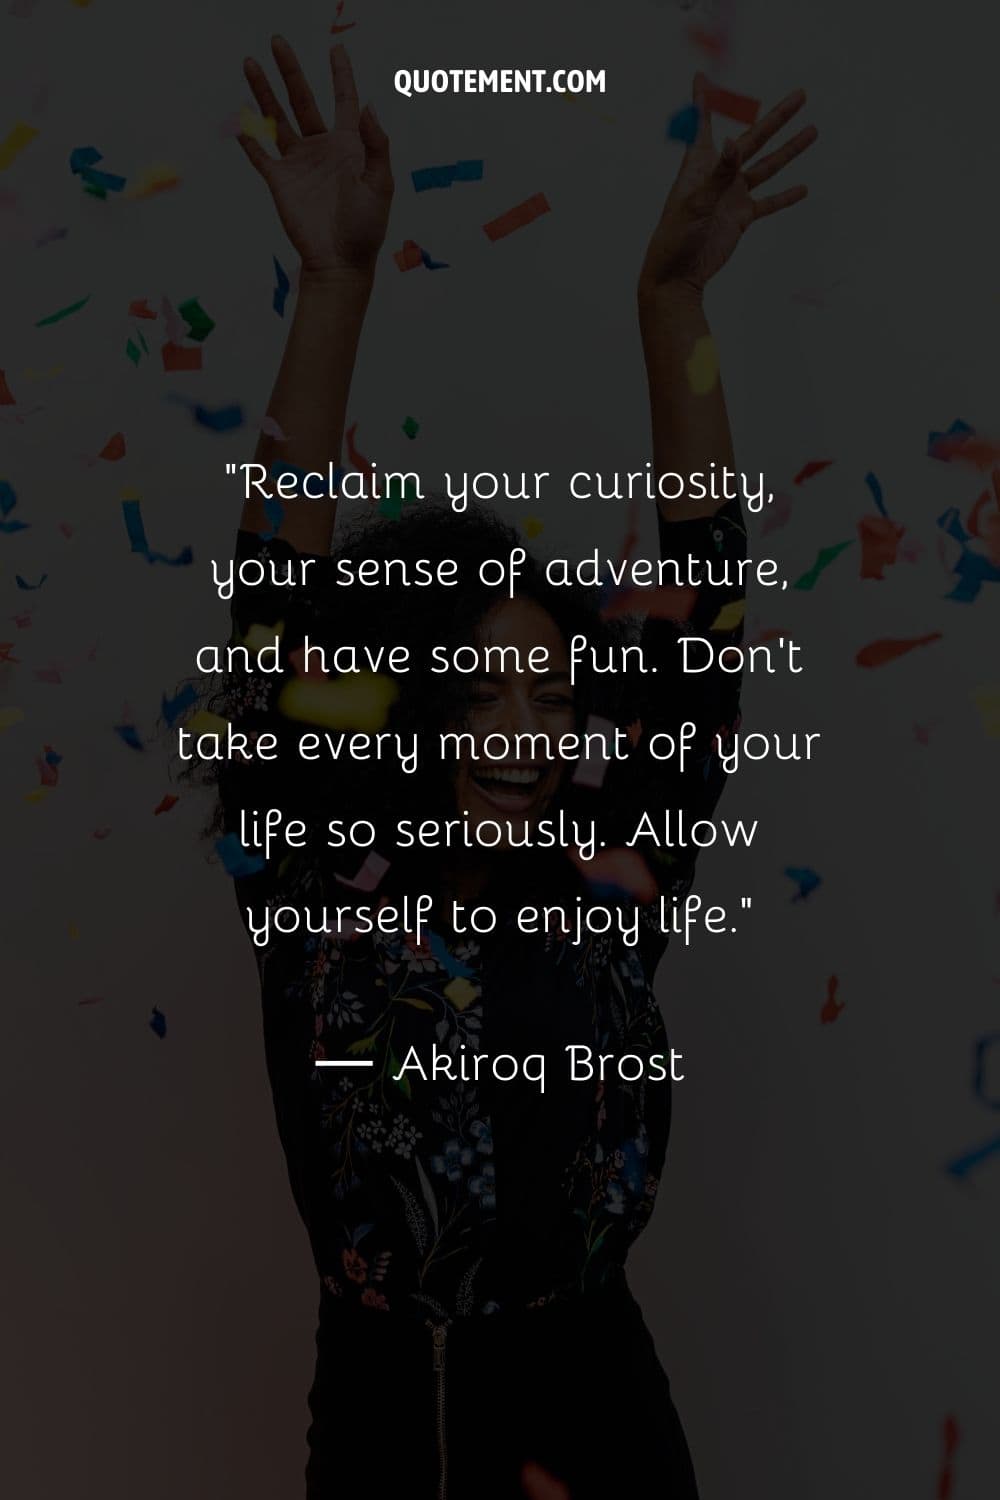 Reclaim your curiosity, your sense of adventure, and have some fun. Don’t take every moment of your life so seriously. Allow yourself to enjoy life